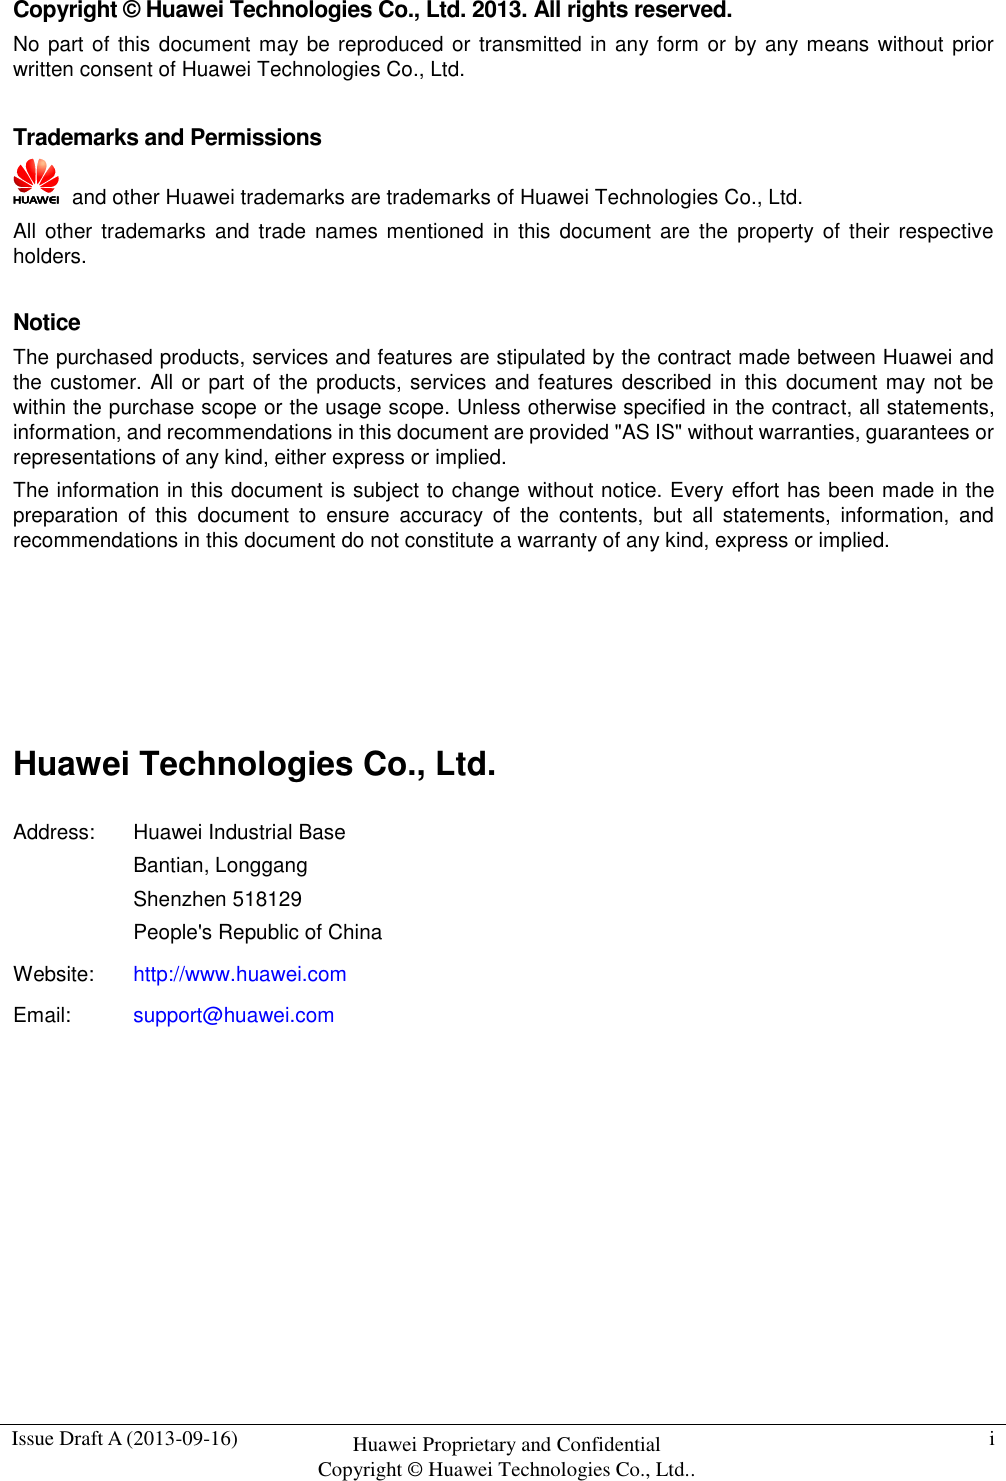  Issue Draft A (2013-09-16) Huawei Proprietary and Confidential                                     Copyright © Huawei Technologies Co., Ltd.. i  Copyright © Huawei Technologies Co., Ltd. 2013. All rights reserved. No part of this document may be reproduced or transmitted in any form or by any means without prior written consent of Huawei Technologies Co., Ltd.  Trademarks and Permissions   and other Huawei trademarks are trademarks of Huawei Technologies Co., Ltd. All other trademarks and  trade  names mentioned in  this  document are  the  property  of their respective holders.  Notice The purchased products, services and features are stipulated by the contract made between Huawei and the customer.  All or part of the products, services and features described in this document may not be within the purchase scope or the usage scope. Unless otherwise specified in the contract, all statements, information, and recommendations in this document are provided &quot;AS IS&quot; without warranties, guarantees or representations of any kind, either express or implied. The information in this document is subject to change without notice. Every  effort has been made in the preparation  of  this  document  to  ensure  accuracy  of  the  contents,  but  all  statements,  information,  and recommendations in this document do not constitute a warranty of any kind, express or implied.     Huawei Technologies Co., Ltd. Address: Huawei Industrial Base Bantian, Longgang Shenzhen 518129 People&apos;s Republic of China Website: http://www.huawei.com Email: support@huawei.com          